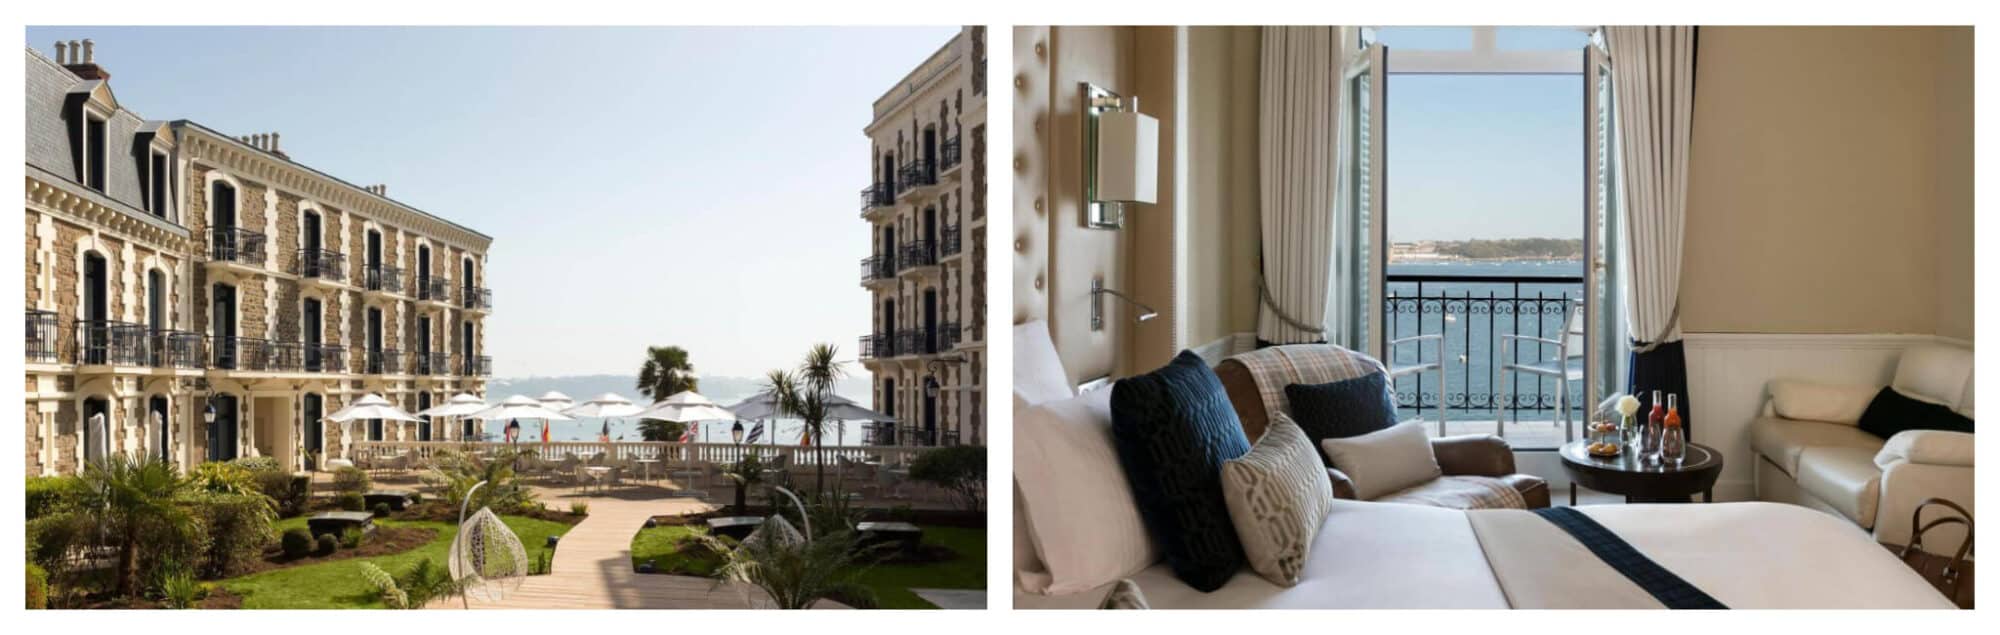 Left: Le Grand Hotel Dinard's garden in between two buildings; Right: A bedroom in Le Grand Hotel Dinard that has a view of Dinard's blue sea.